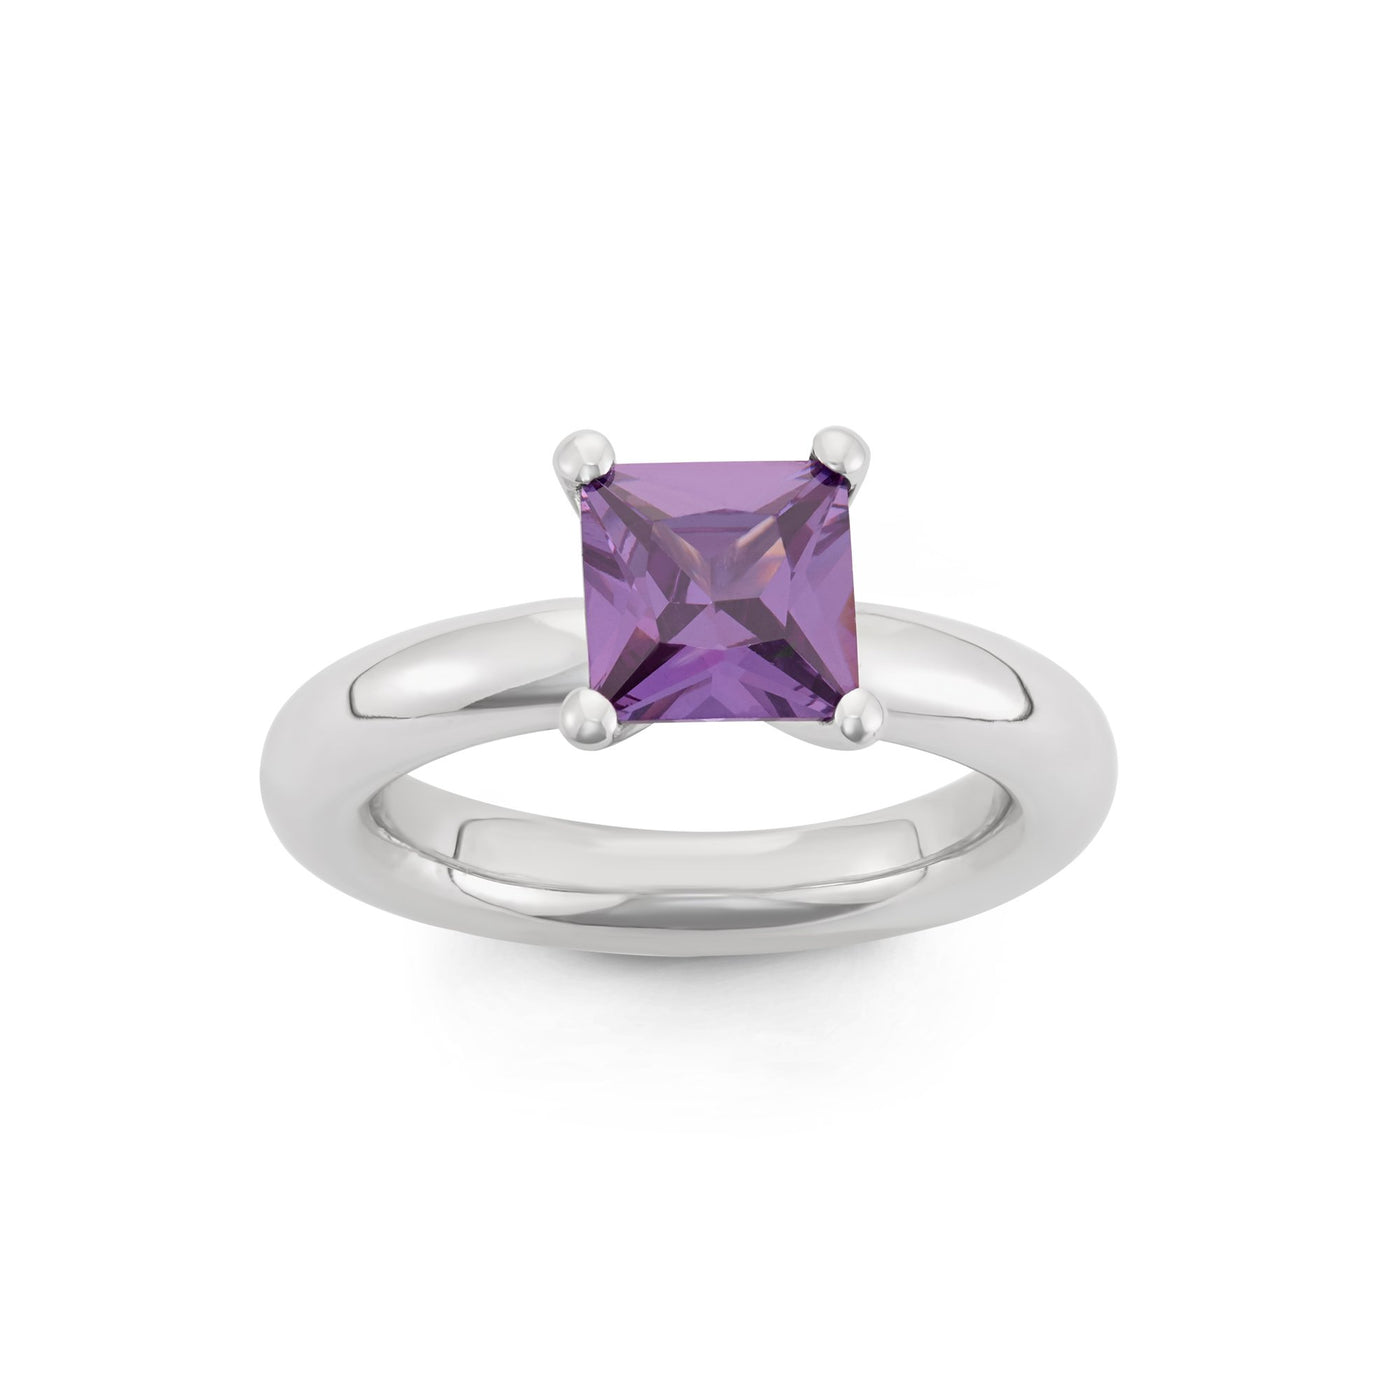 Sterling Silver Spinning Ring With Faceted Amethyst Square CZ Center Stone